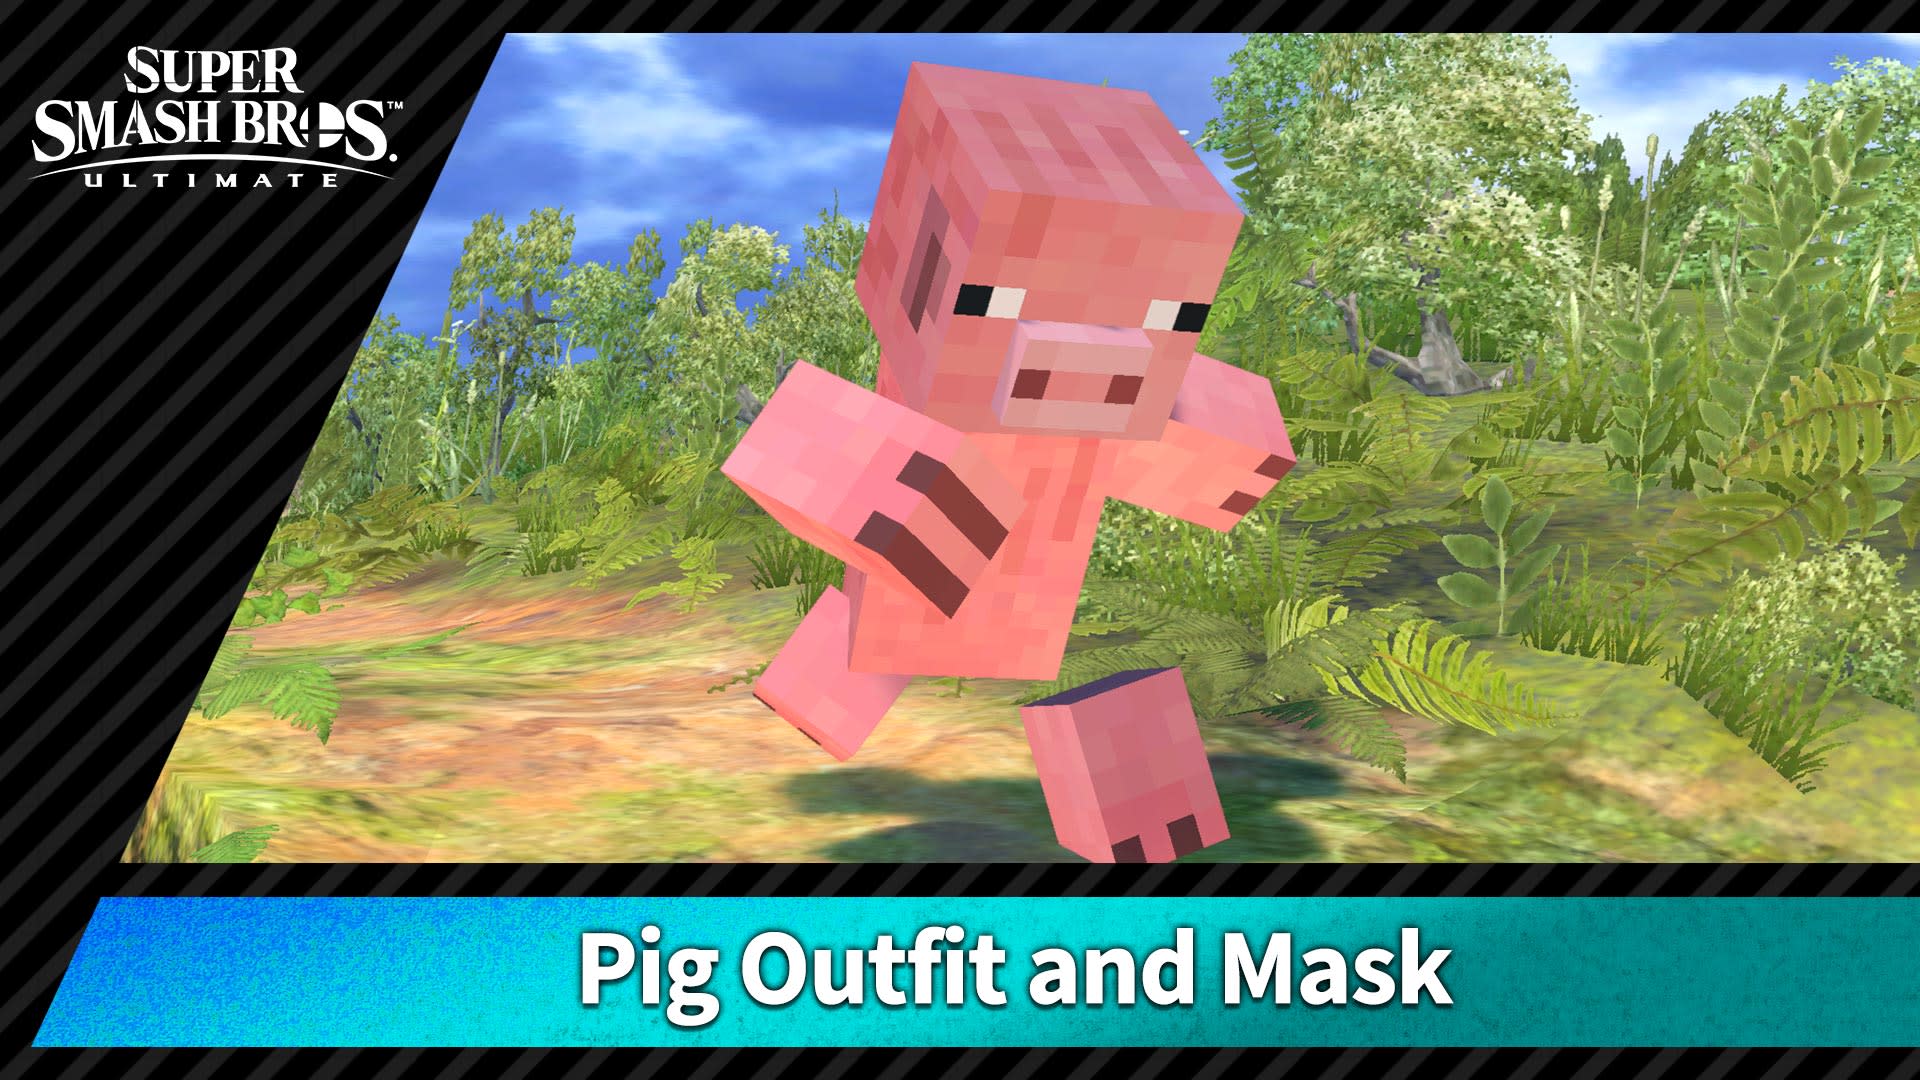 【Costume】Pig Outfit and Mask